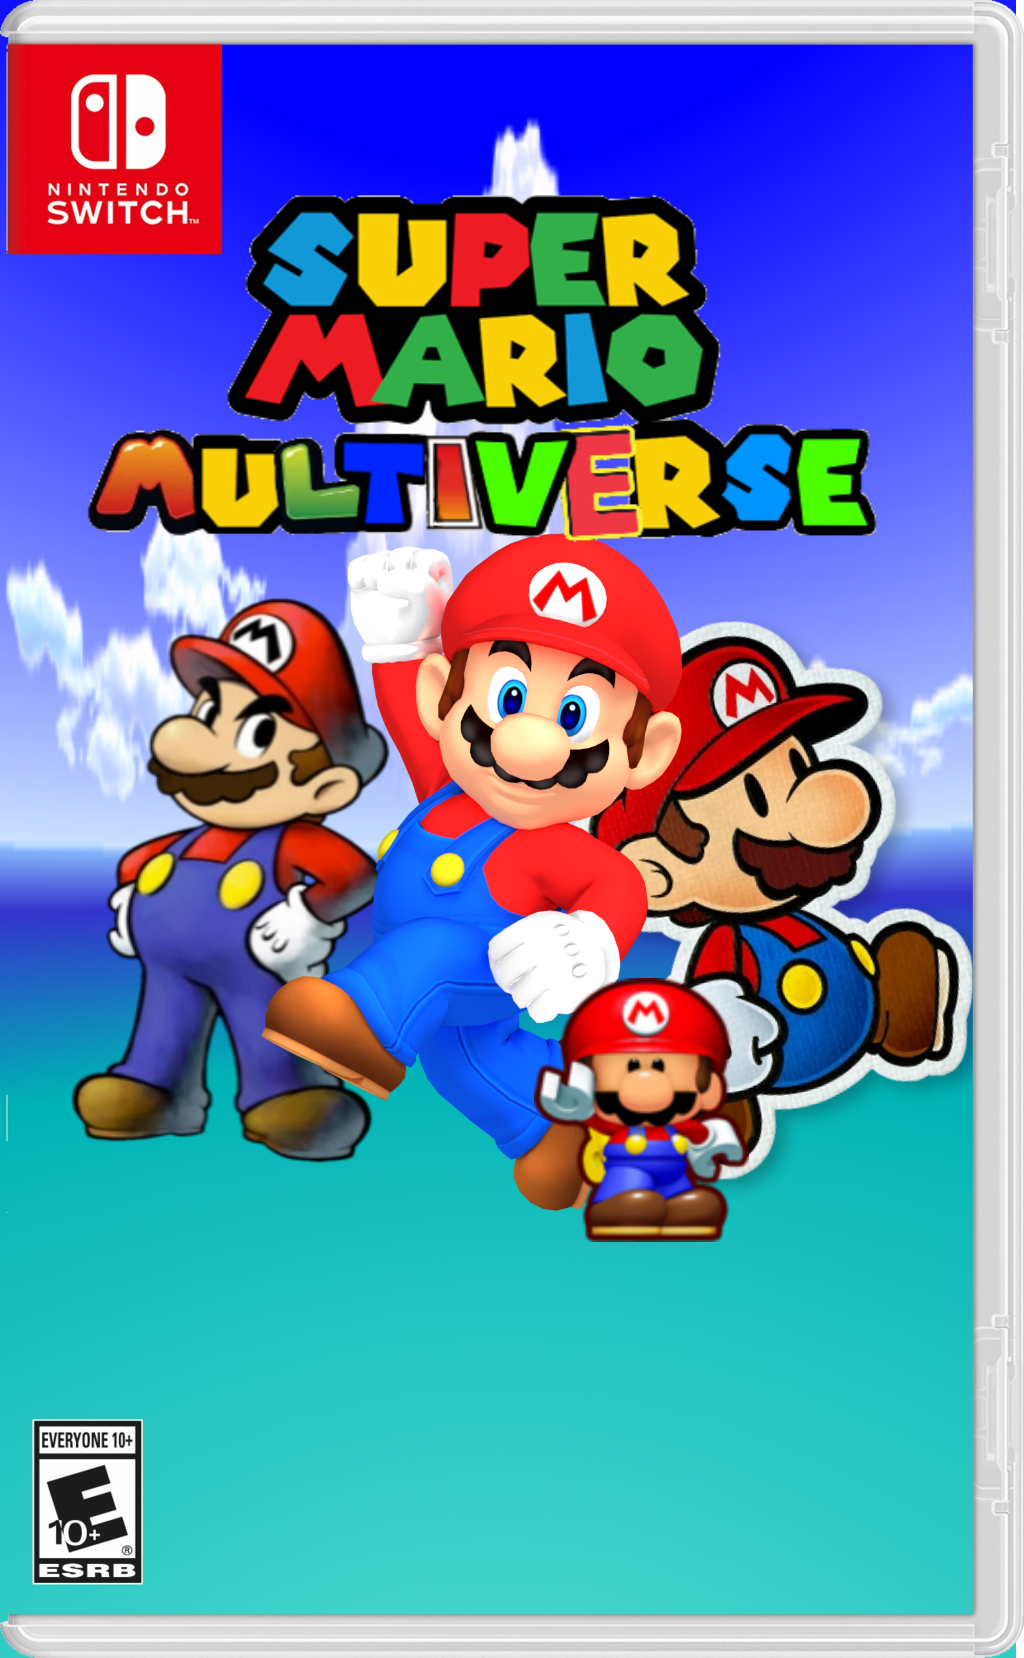 Mario's World APK Download for Android Free